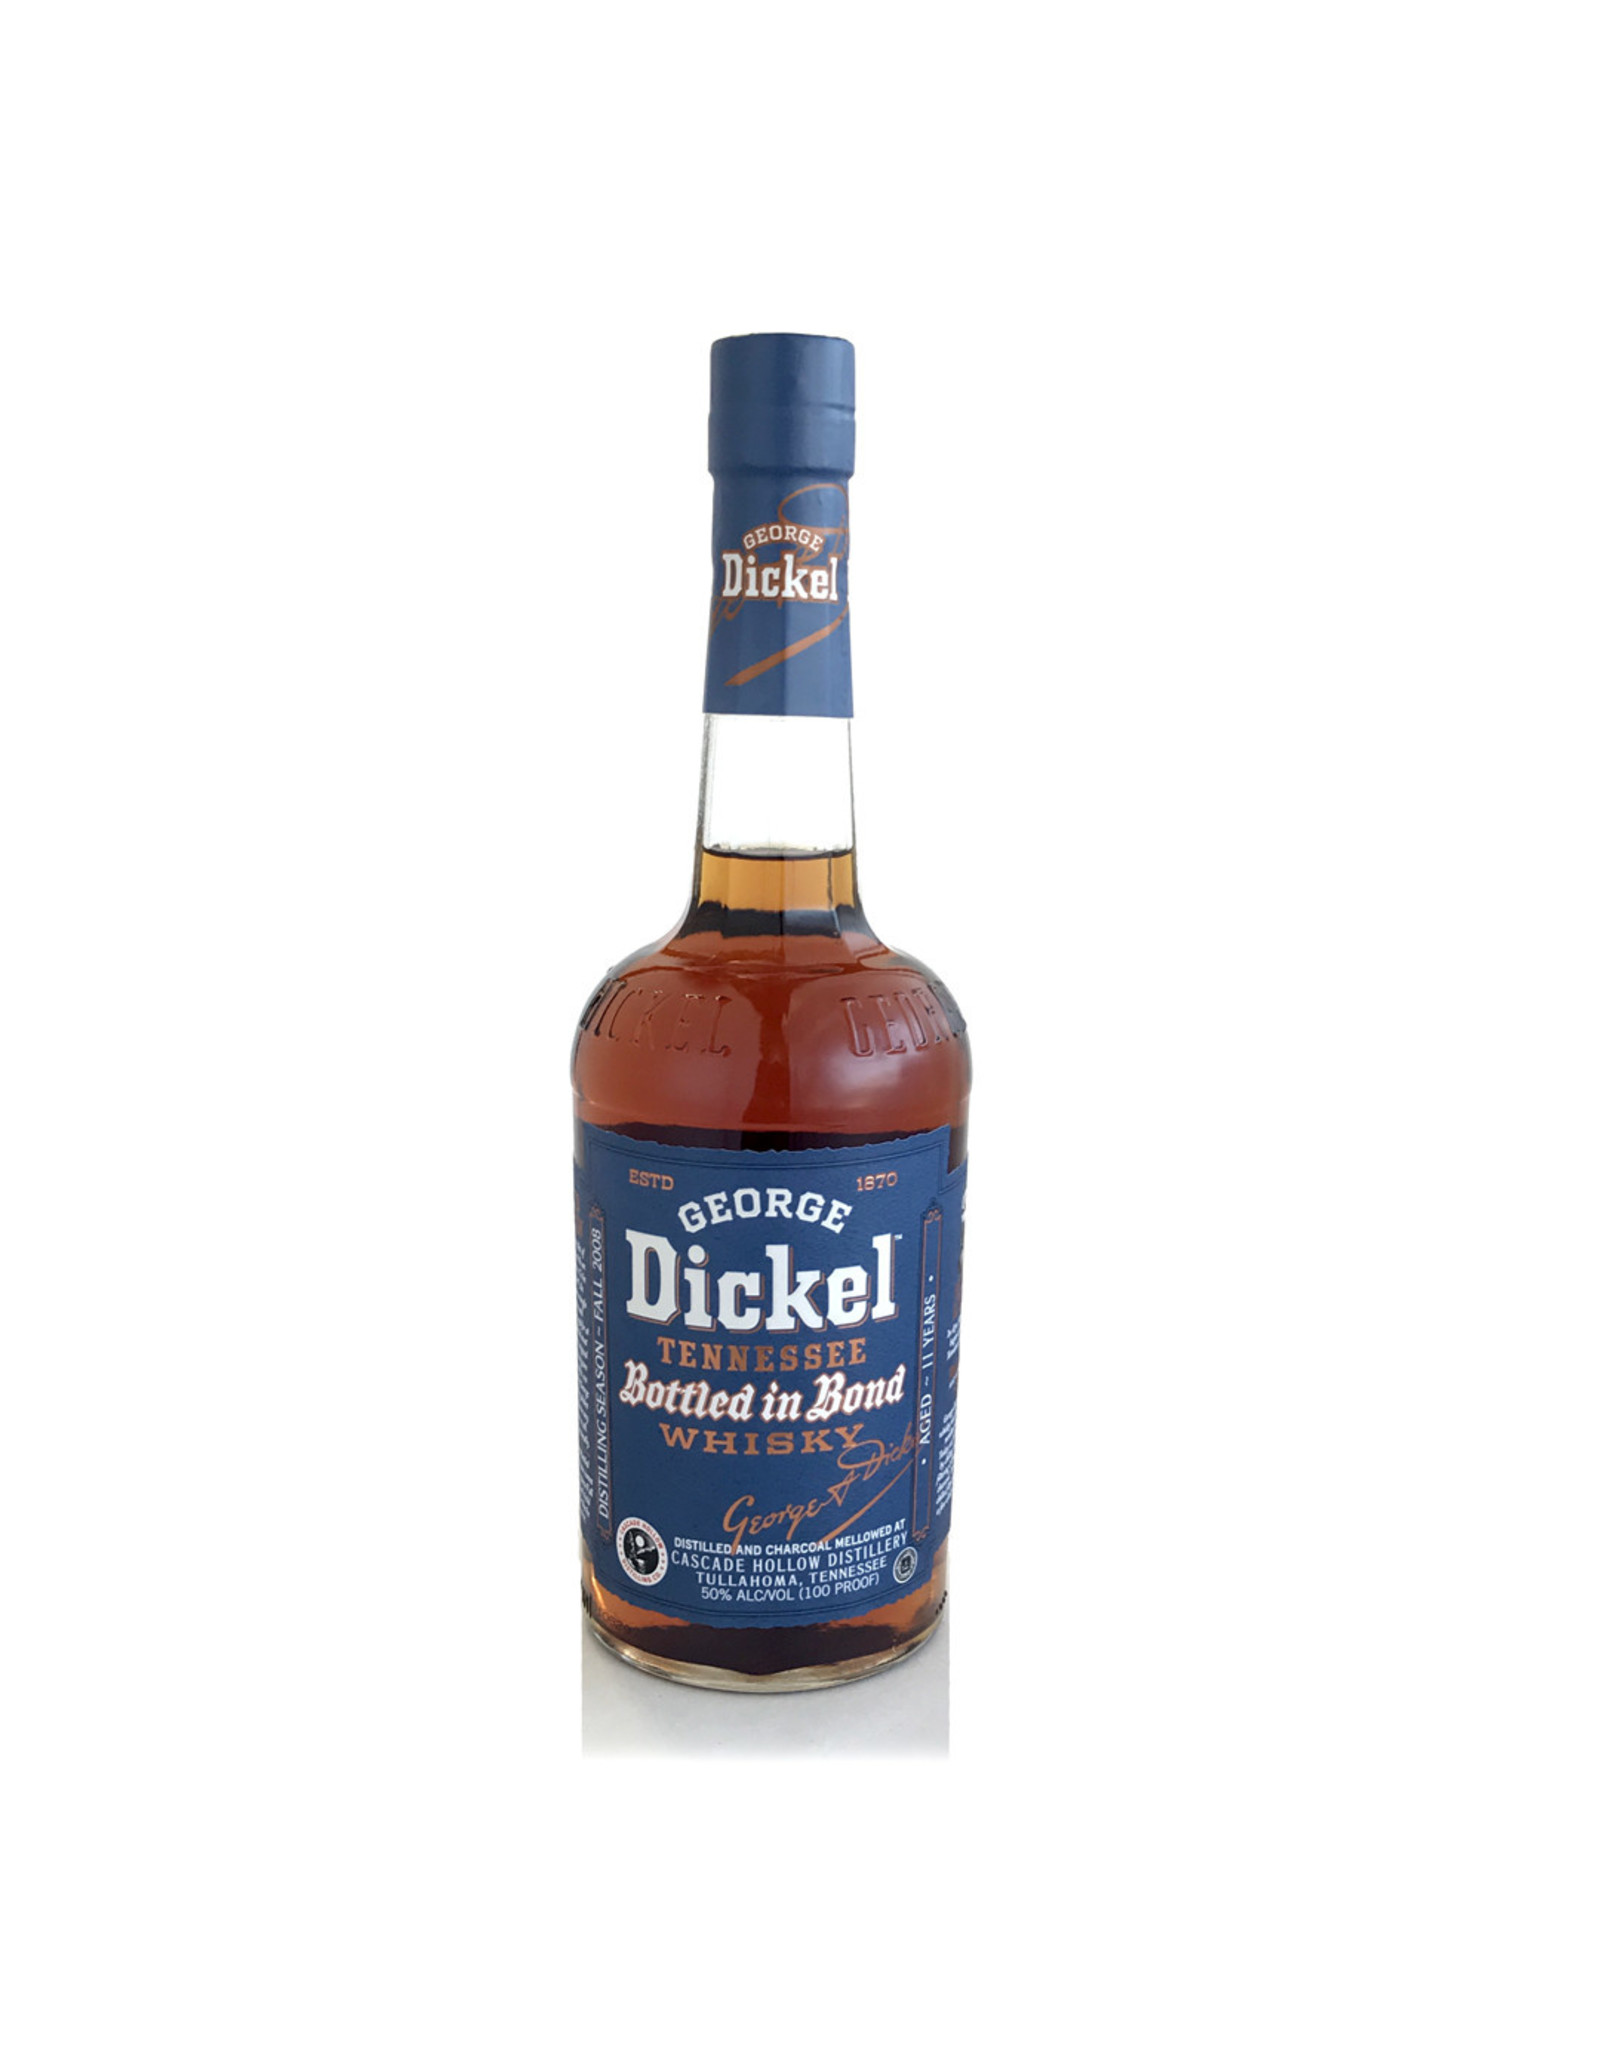 George Dickel Bottled in Bond Tennessee Whisky, Tennessee, 13 Year